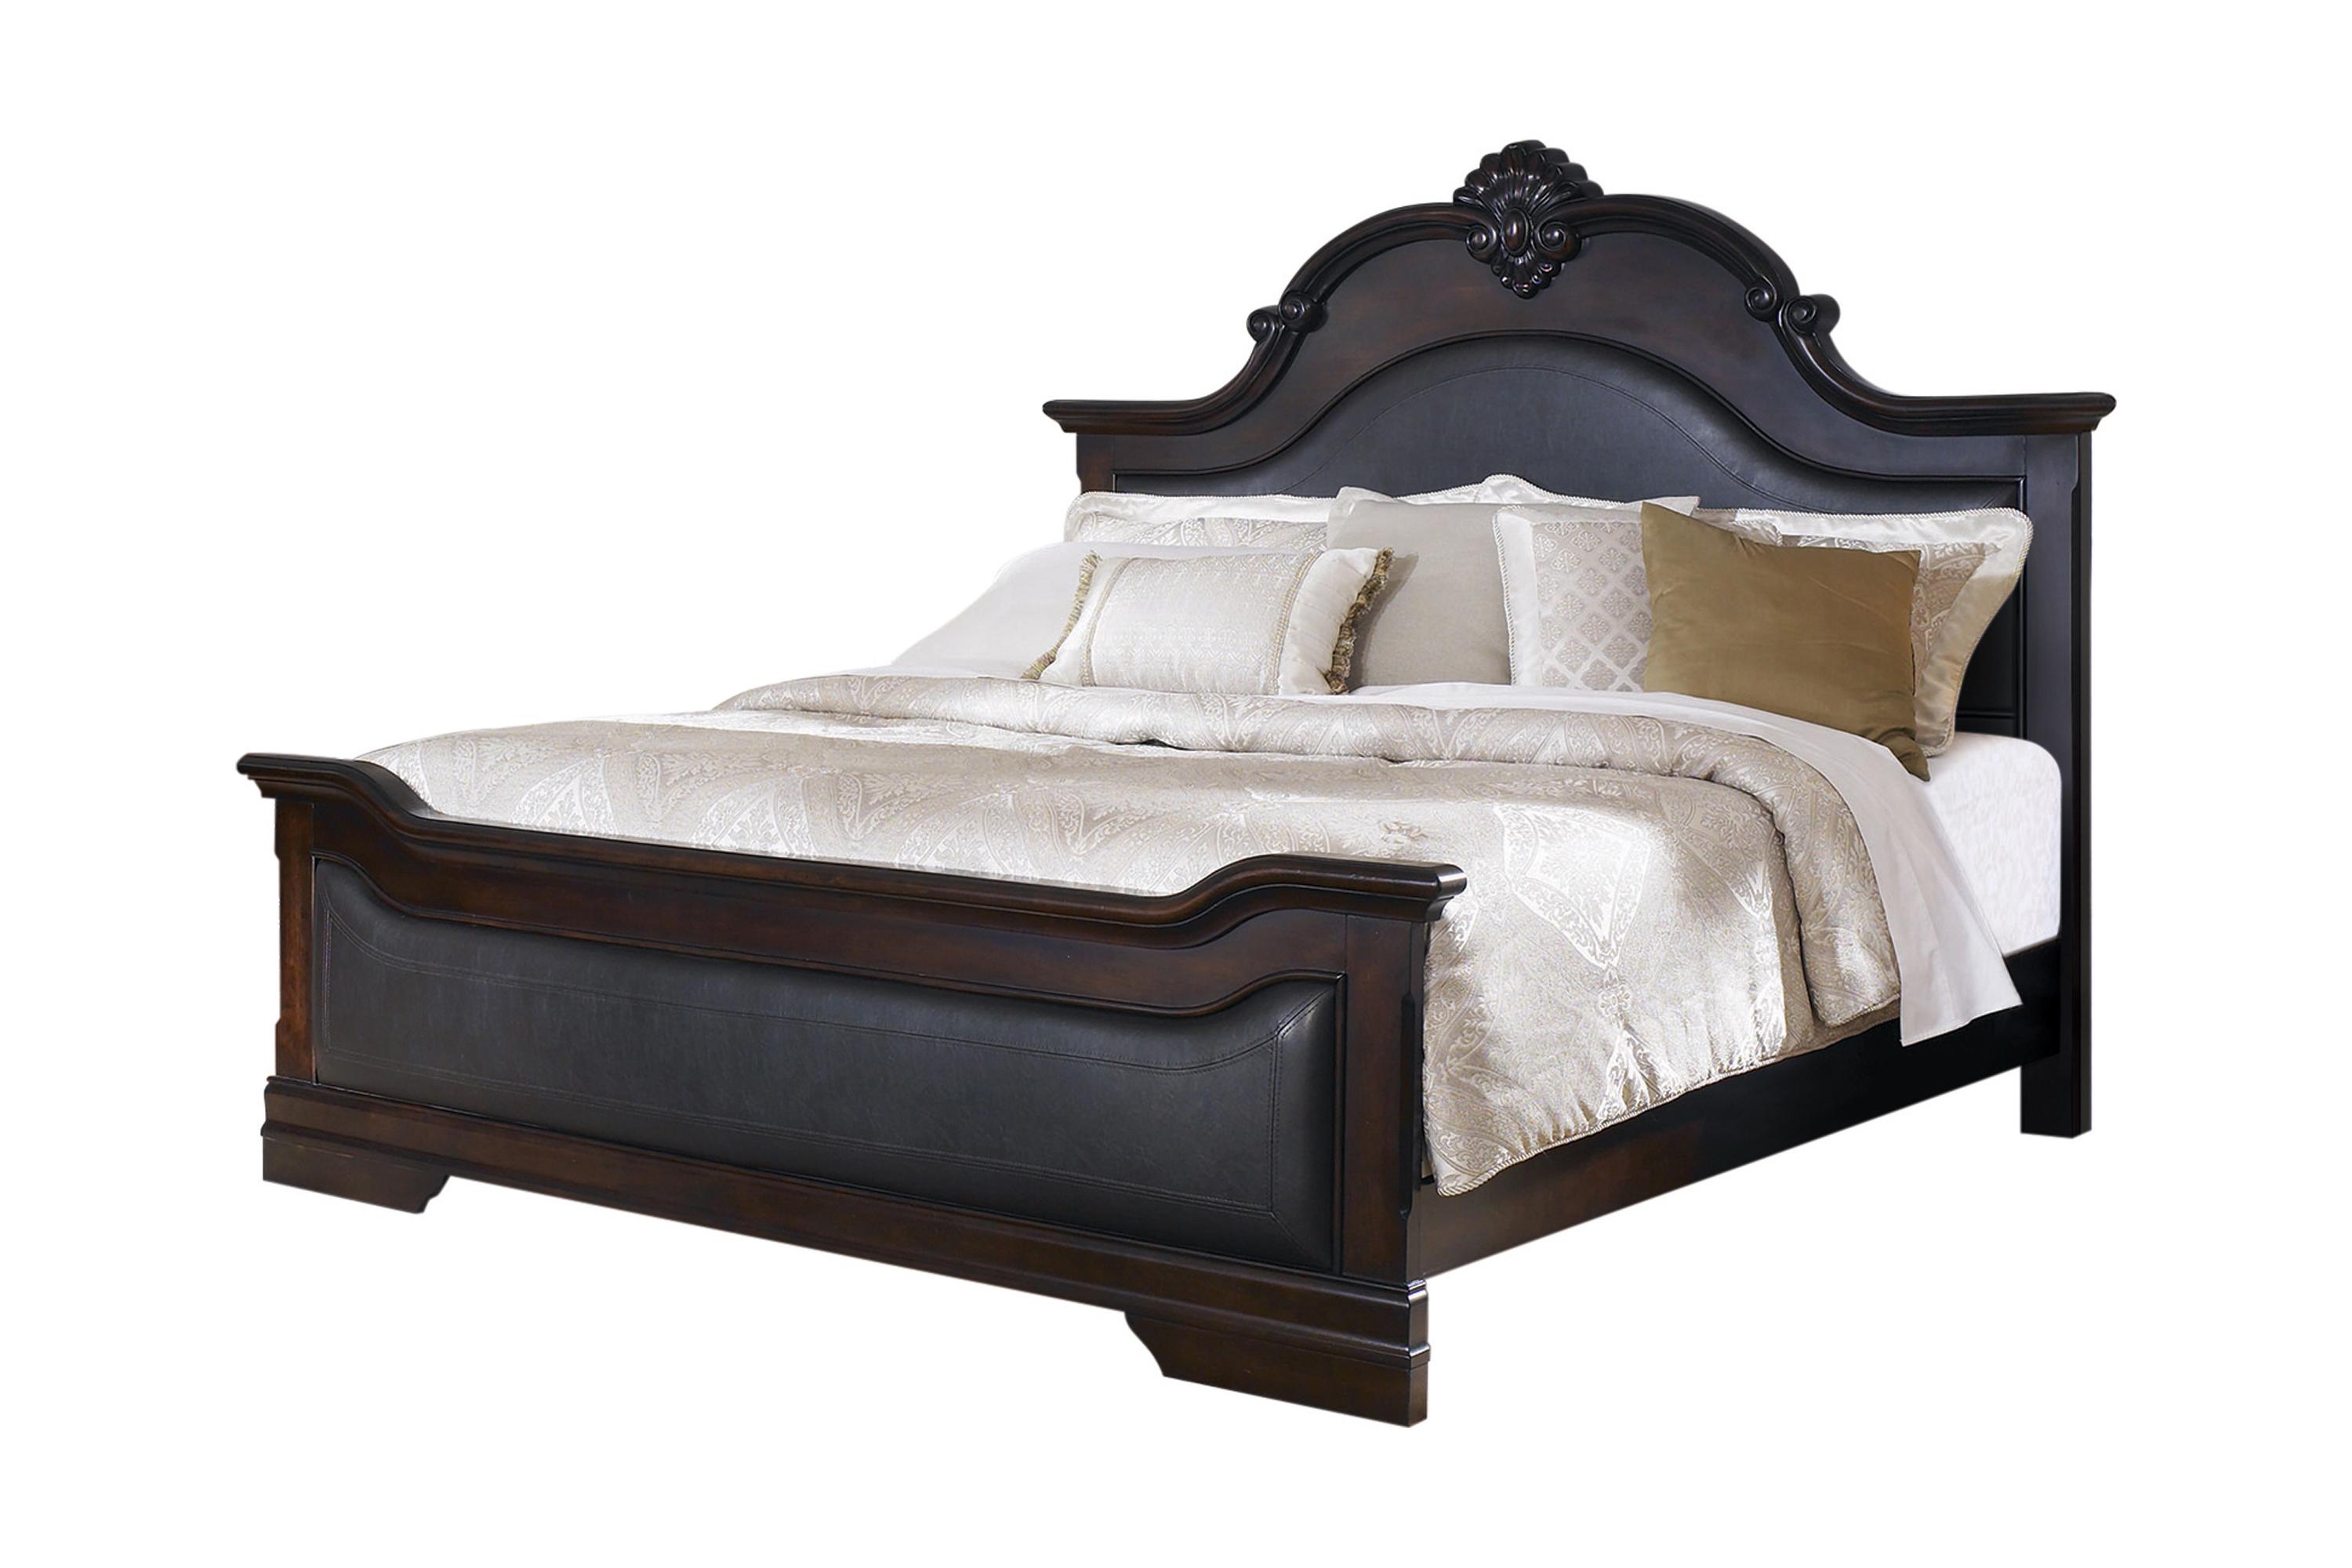 Traditional Bed 203191Q Cambridge 203191Q in Cappuccino Leatherette